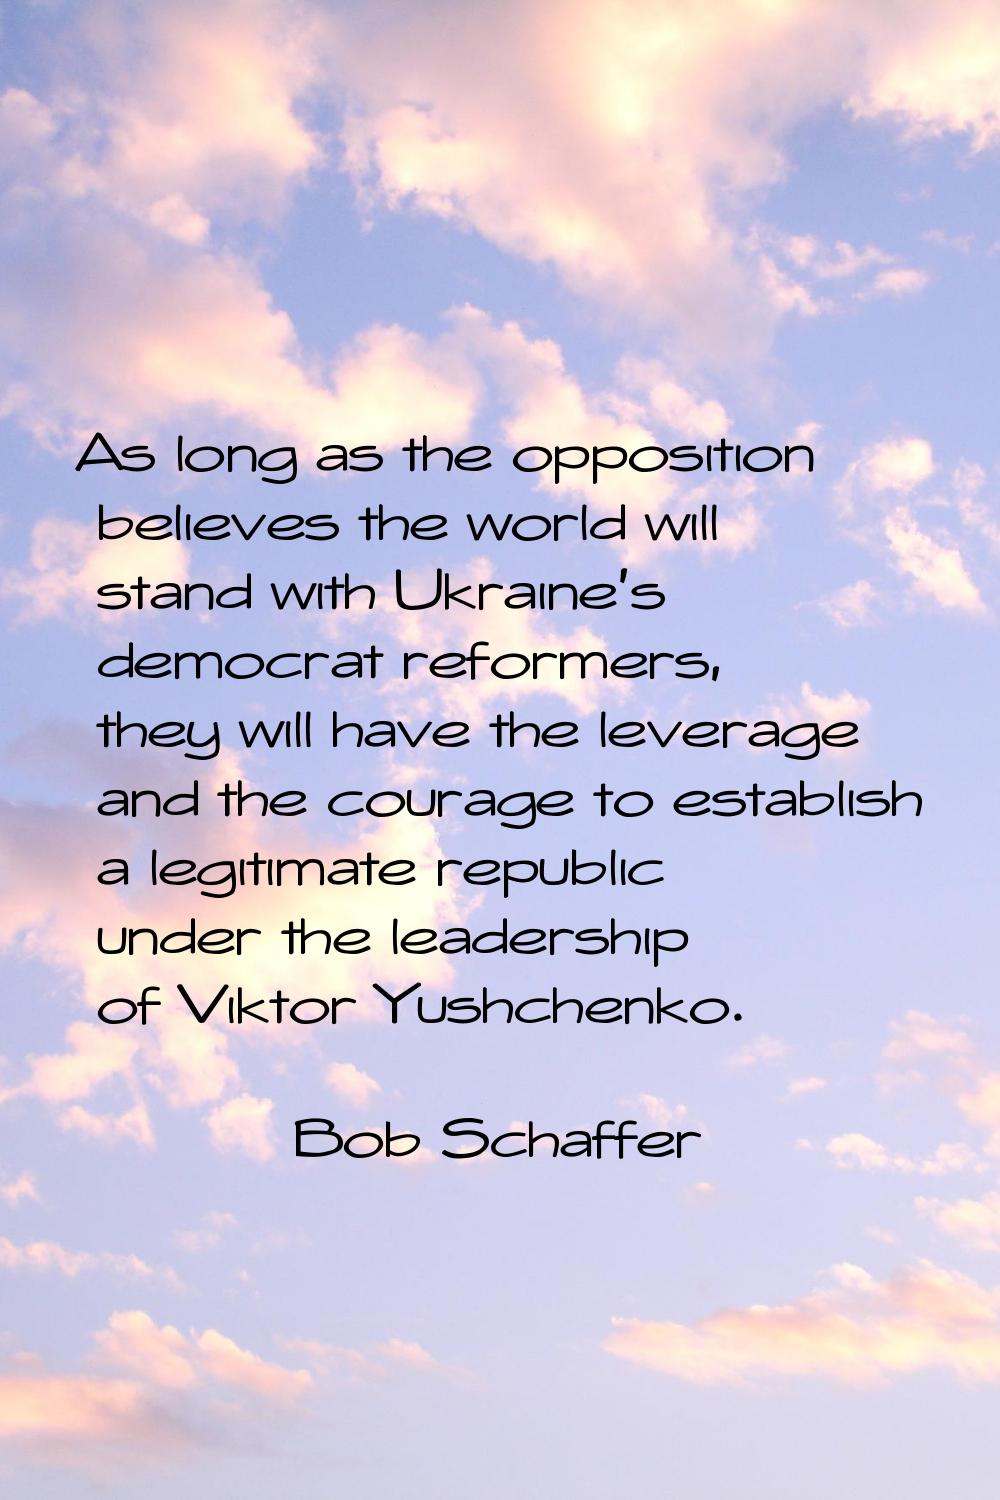 As long as the opposition believes the world will stand with Ukraine's democrat reformers, they wil